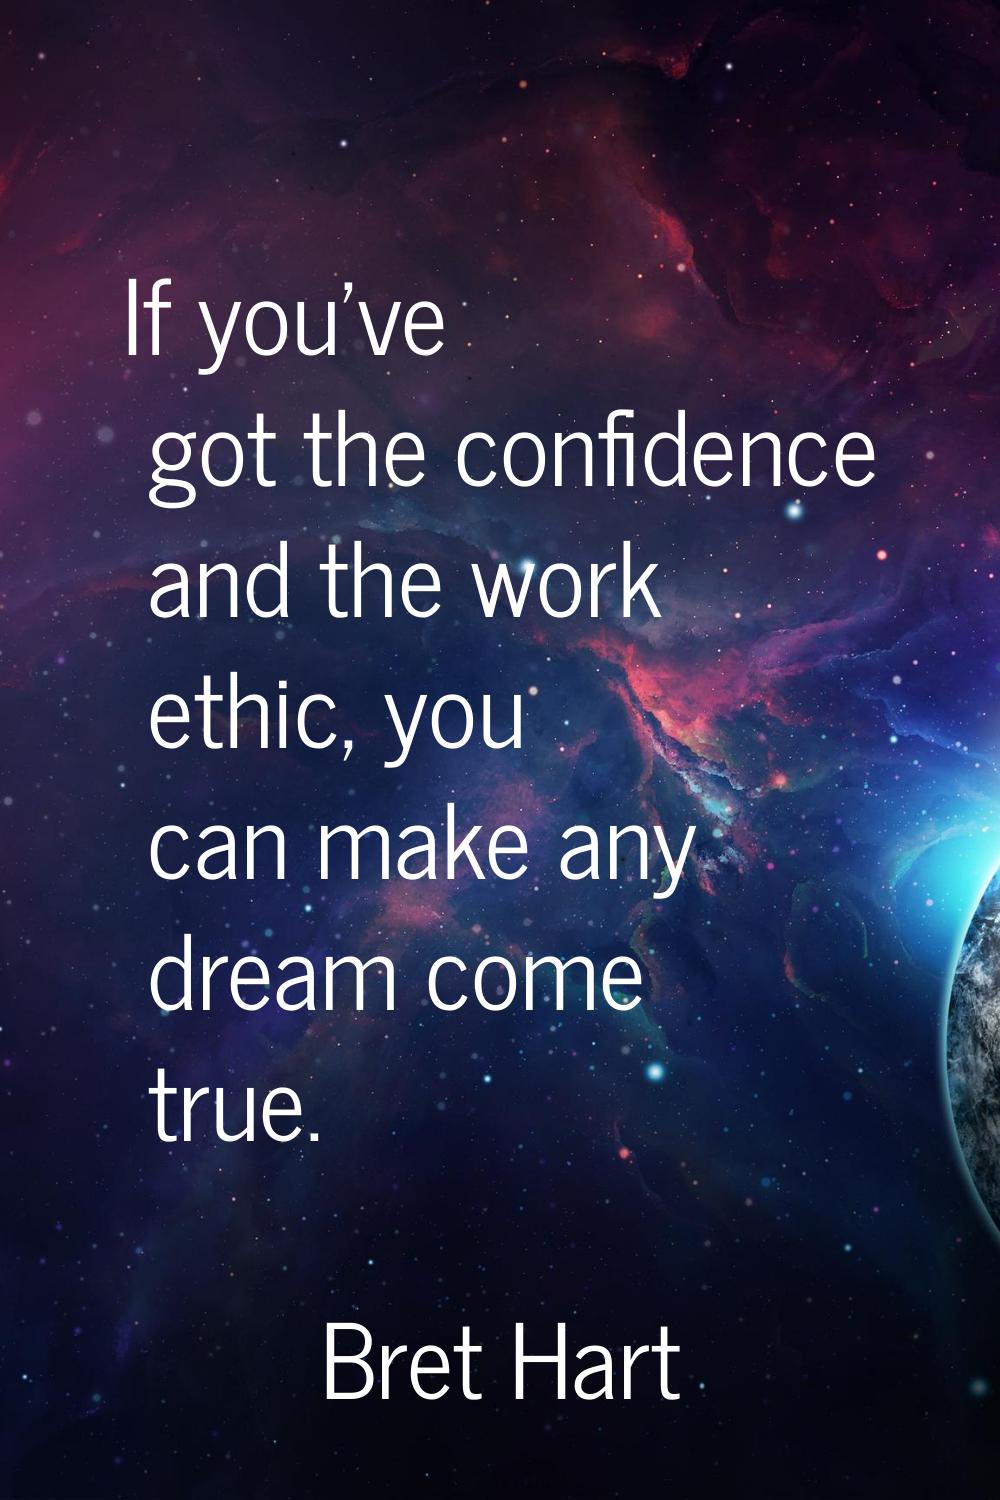 If you've got the confidence and the work ethic, you can make any dream come true.